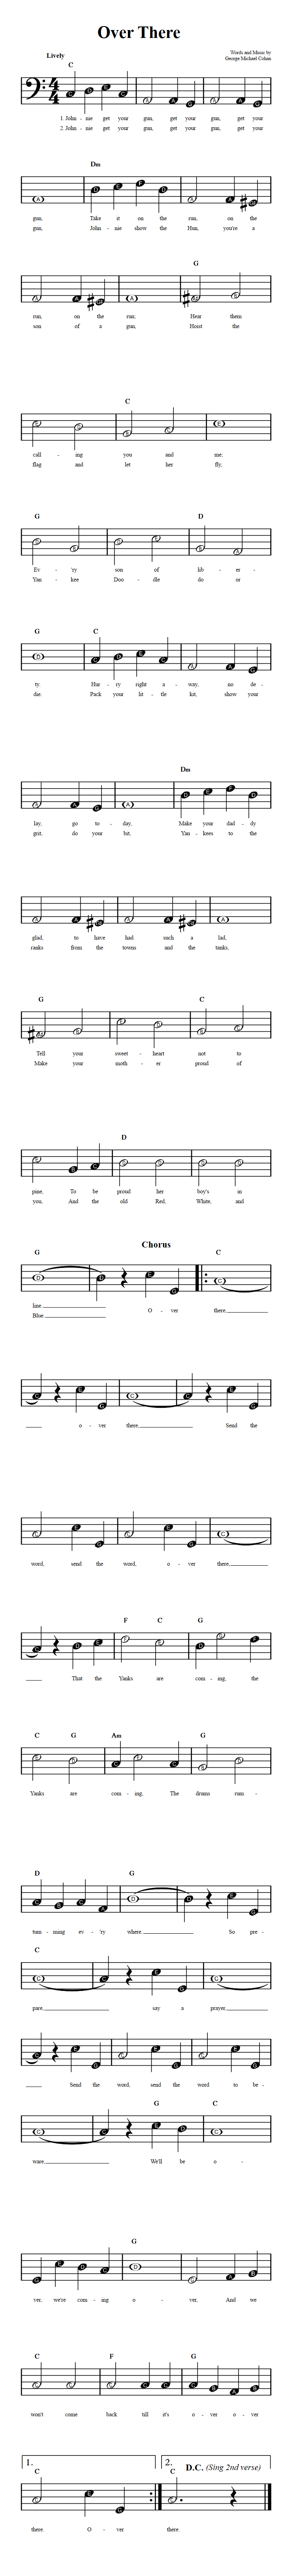 Over There  Beginner Bass Clef Sheet Music